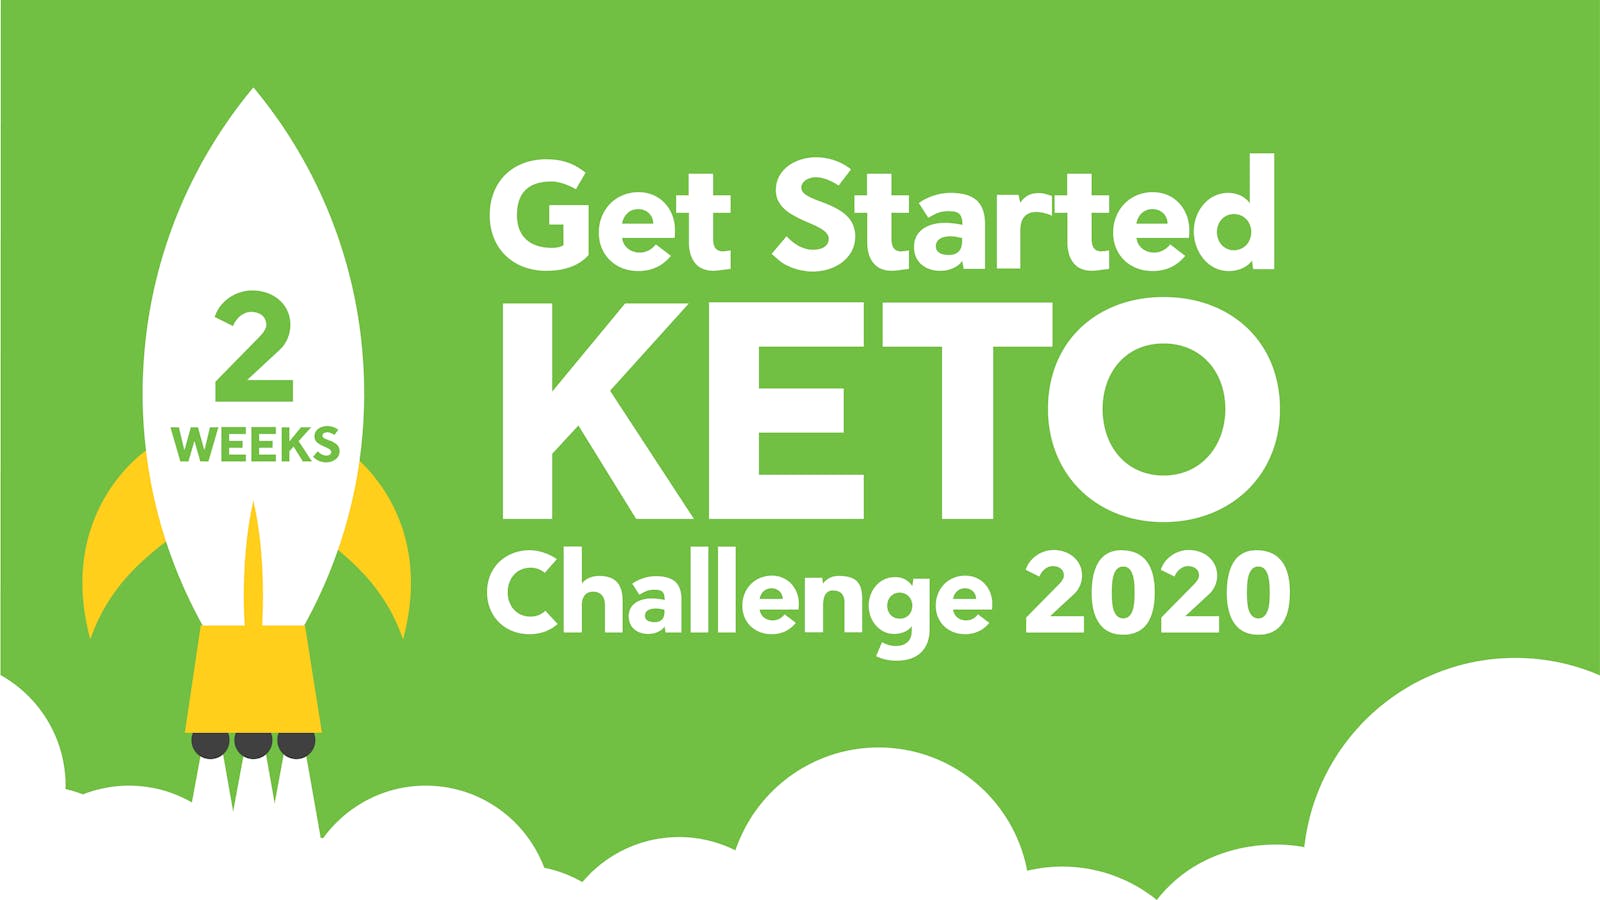 keto diet side with challenge